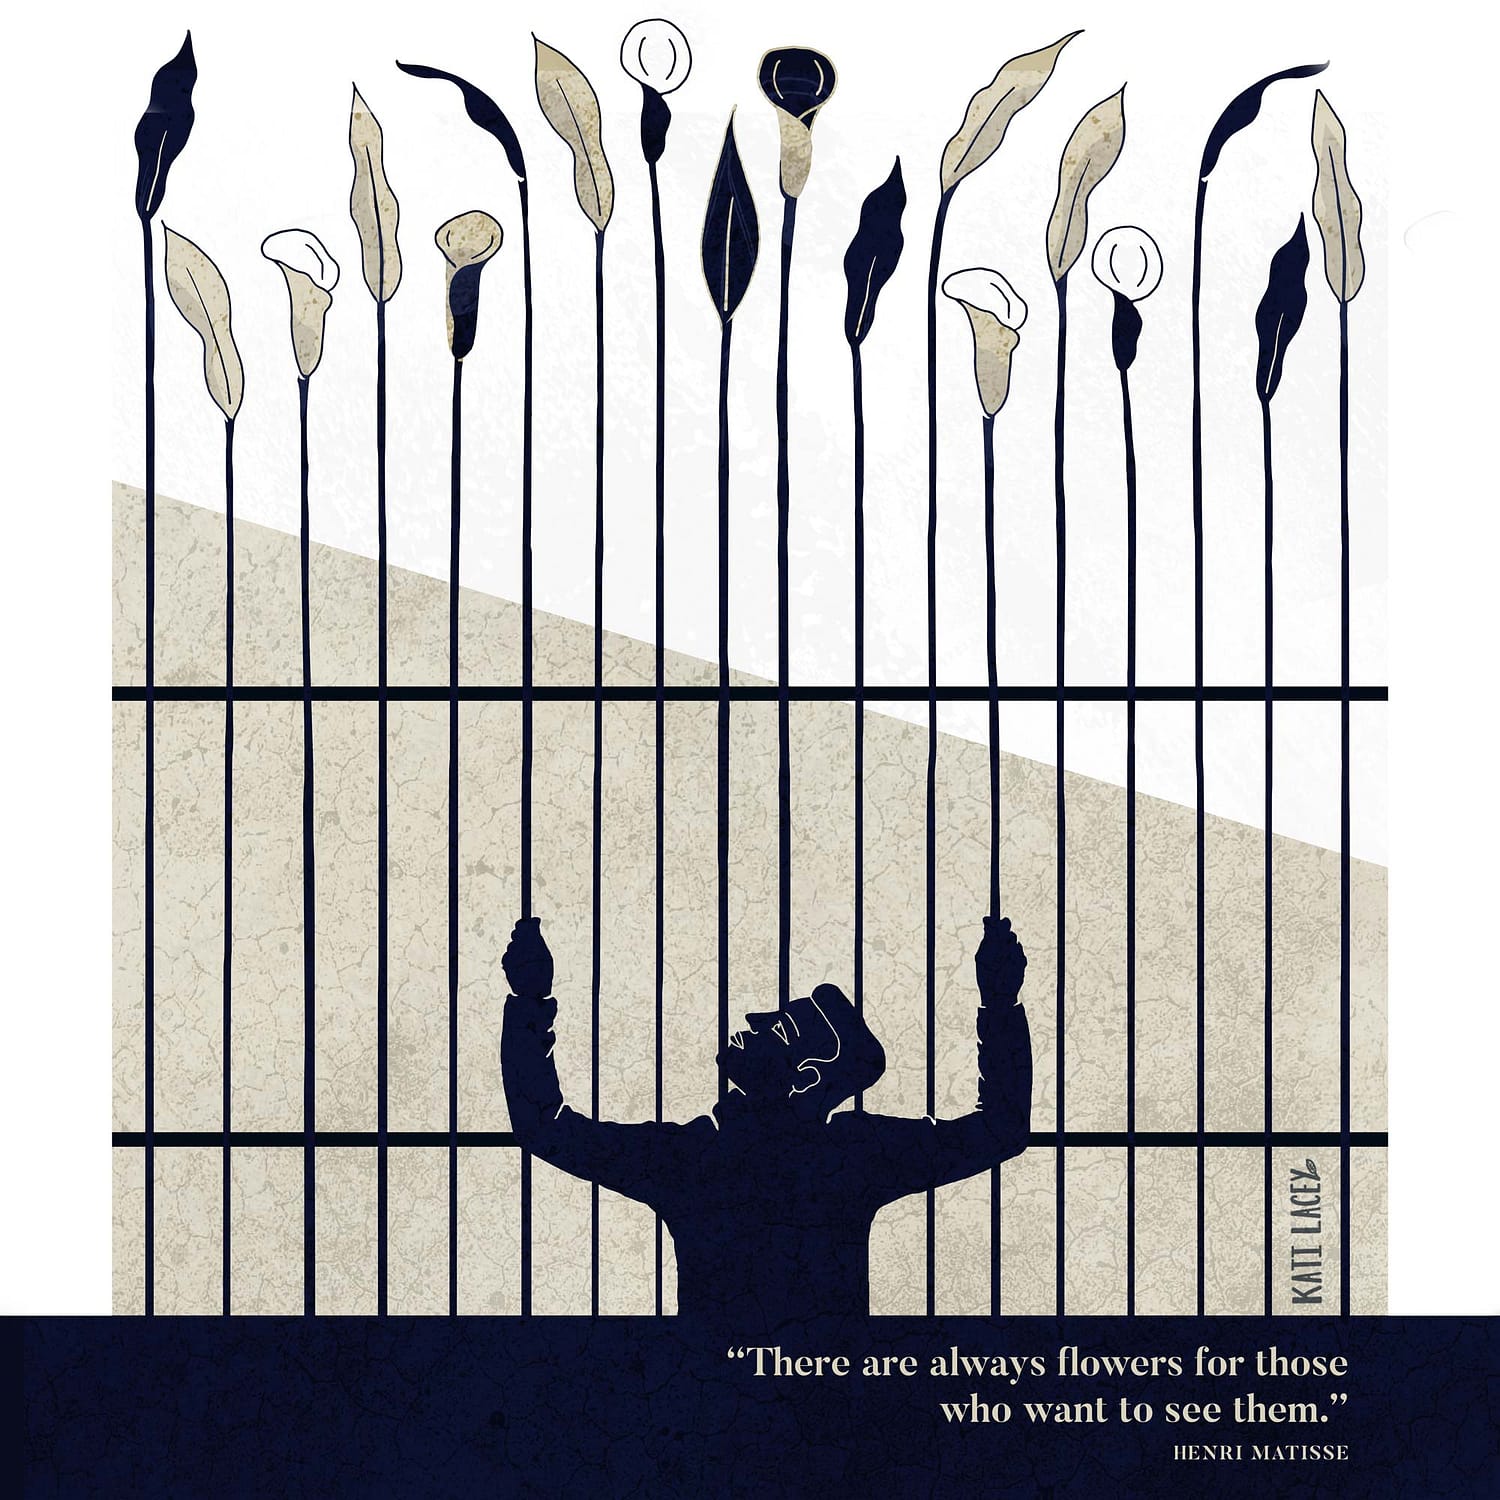 Flower prison quote illustration:There-are-always-flowers-for-those-who-want-to-see-them.-HENRI-MATISSE-illustration-by-KATI-LACEY